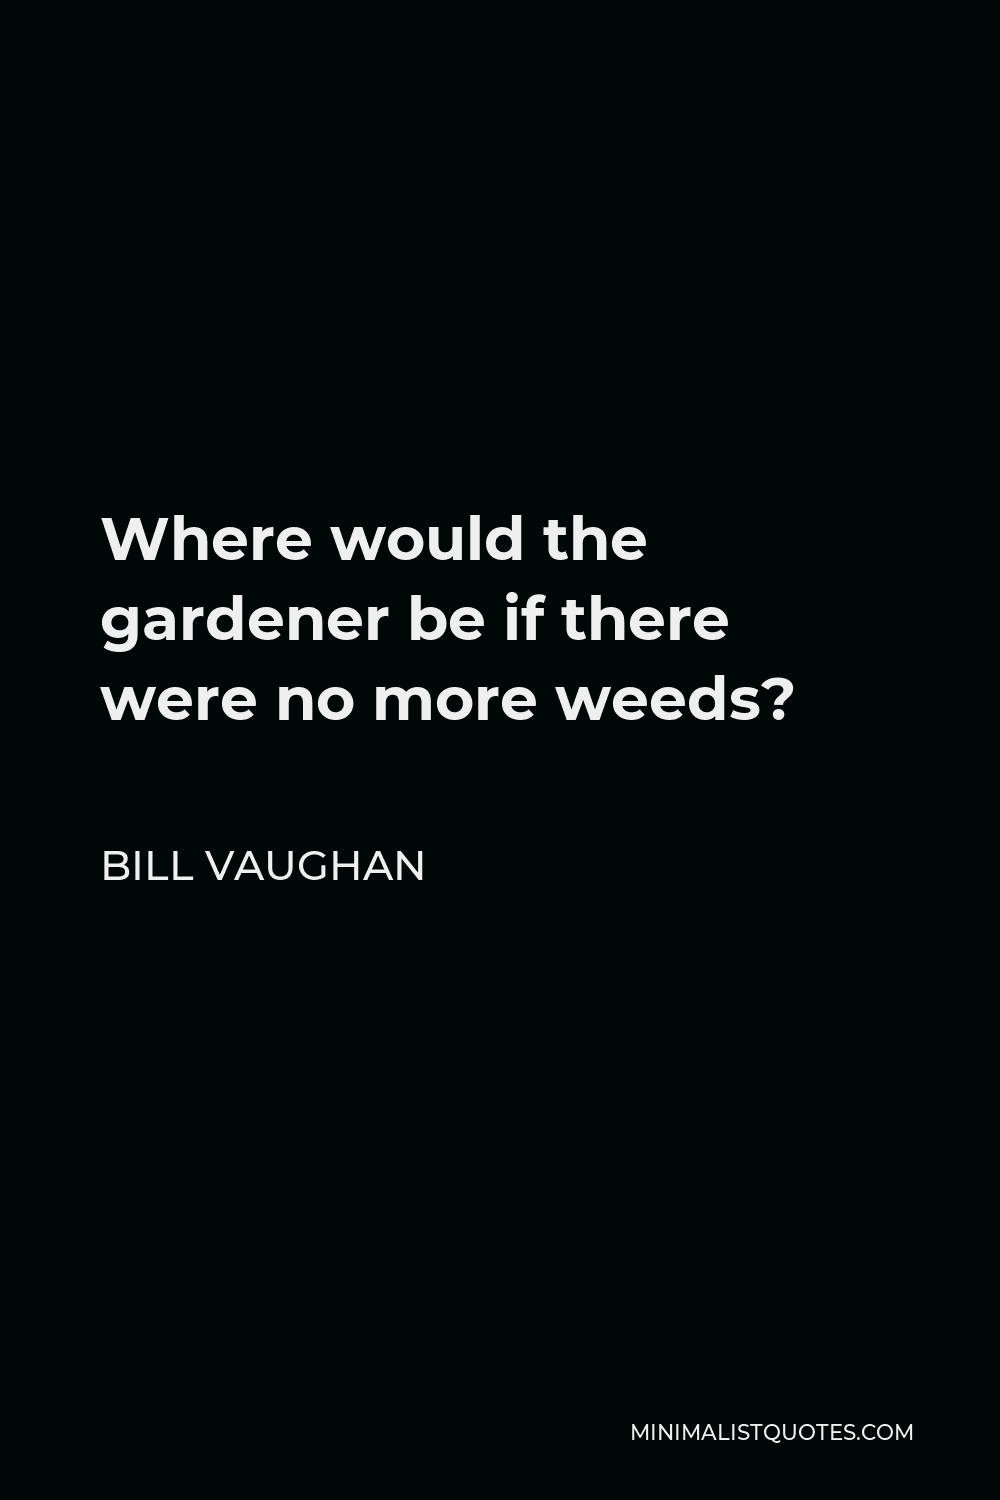 Bill Vaughan Quote - Where would the gardener be if there were no more weeds?